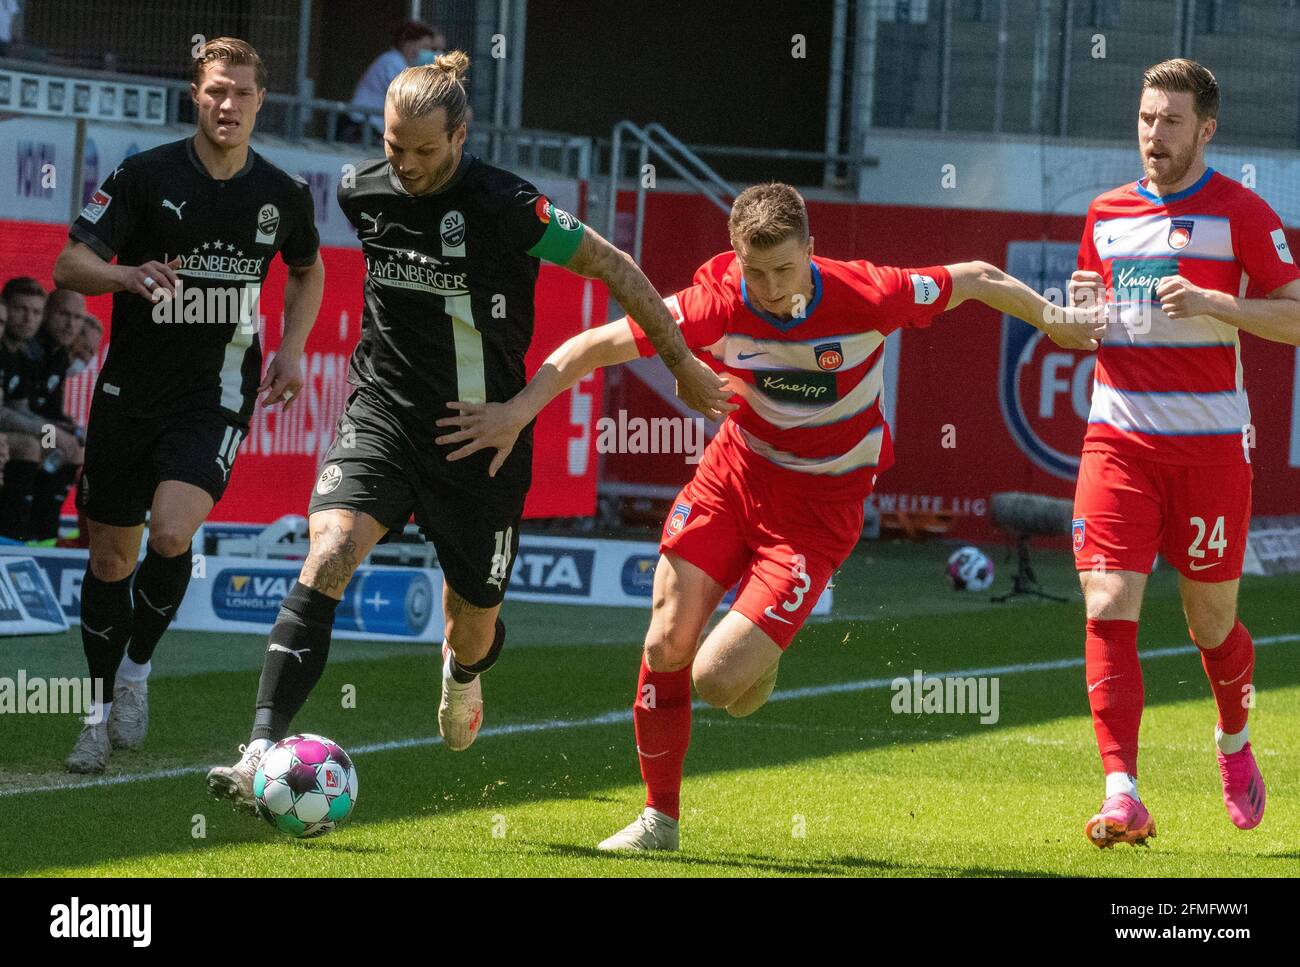 Heidenheim, Germany. 09th May, 2021. Football: 2. Bundesliga, 1. FC Heidenheim - SV Sandhausen, Matchday 32 at Voith Arena. Heidenheim's Jan Schöppner (r) and Sandhausen's Dennis Diekmeier fight for the ball. Credit: Stefan Puchner/dpa - IMPORTANT NOTE: In accordance with the regulations of the DFL Deutsche Fußball Liga and/or the DFB Deutscher Fußball-Bund, it is prohibited to use or have used photographs taken in the stadium and/or of the match in the form of sequence pictures and/or video-like photo series./dpa/Alamy Live News Stock Photo